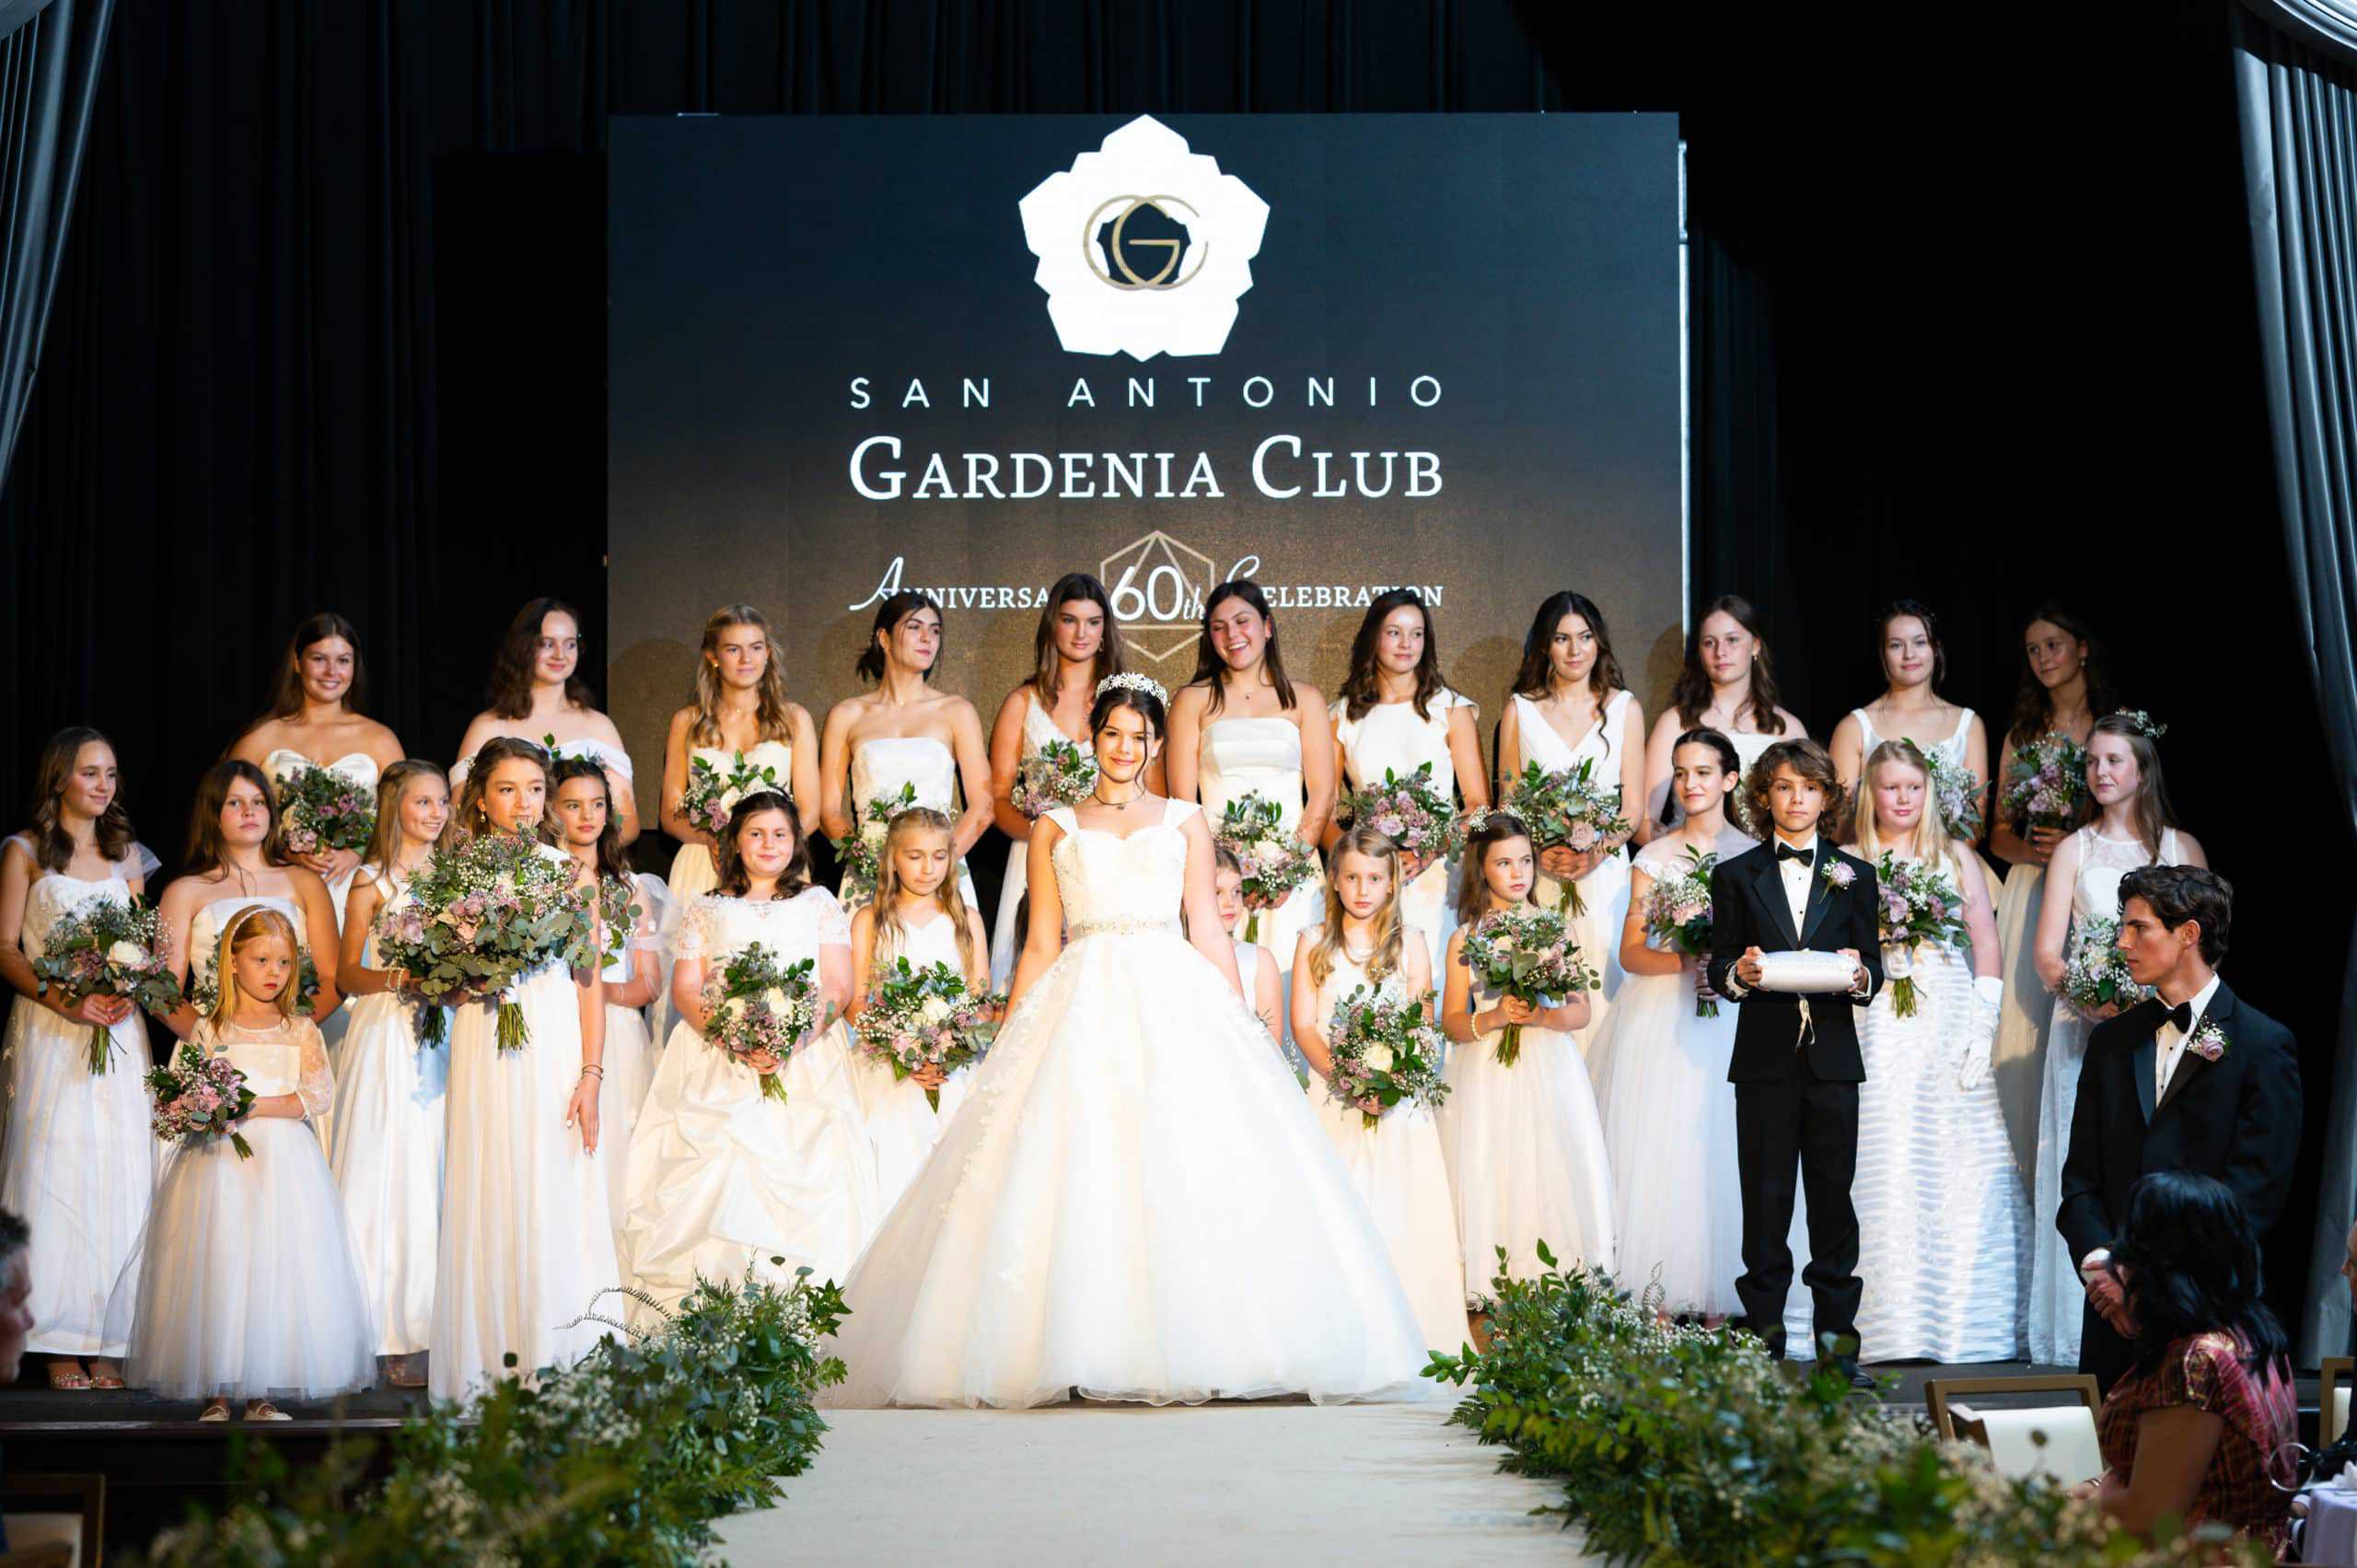 2021 Gardenia Club Queen and Her Court - (MAIN PHOTO - PAGE 1)